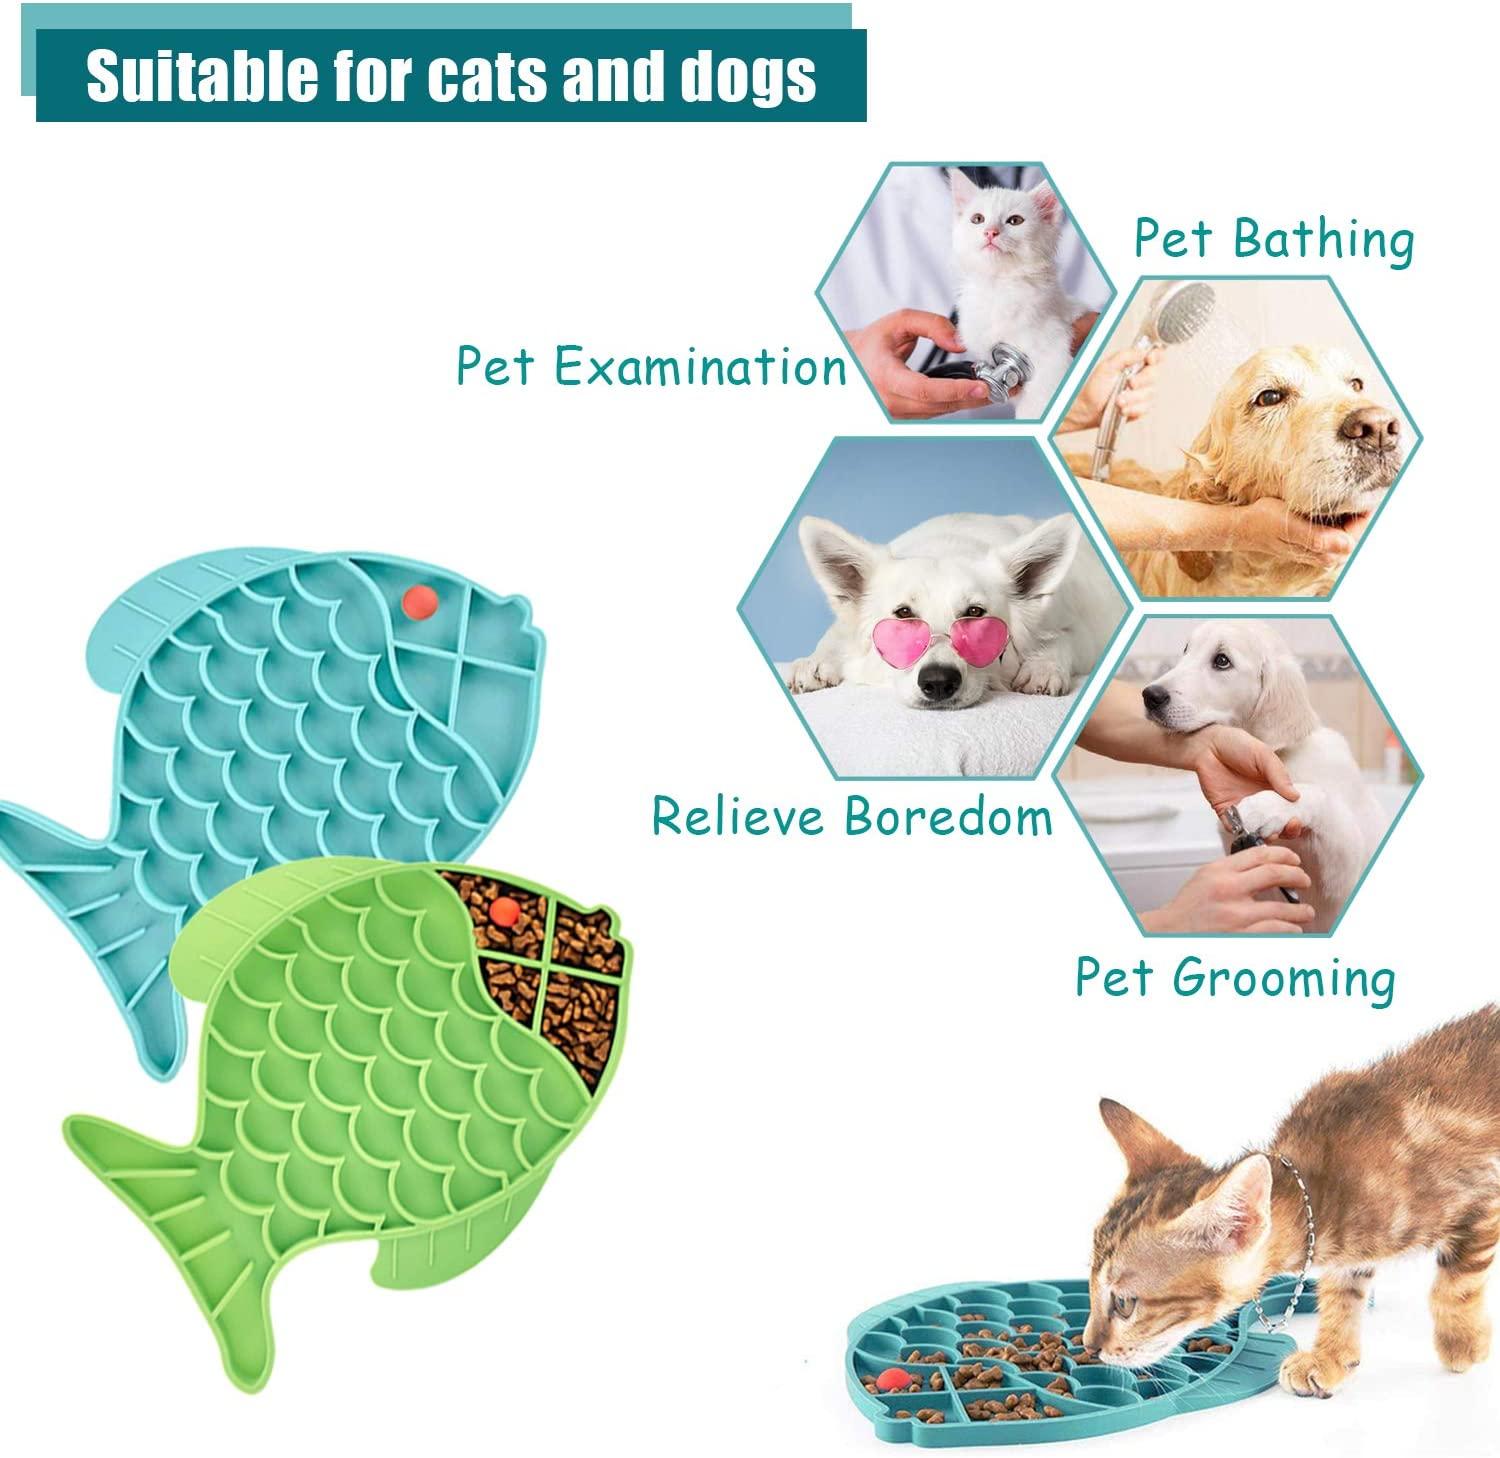 DLDER Cat Slow Feeder,2 Pack Fish-Shaped Cat Lick Treat Mat for Cats Dogs  Anxiety Relief, Cat Puzzle Feeder Cat Bowl, Fun Alternative to Slow Feeder  Cat Bowl. Double fish shape